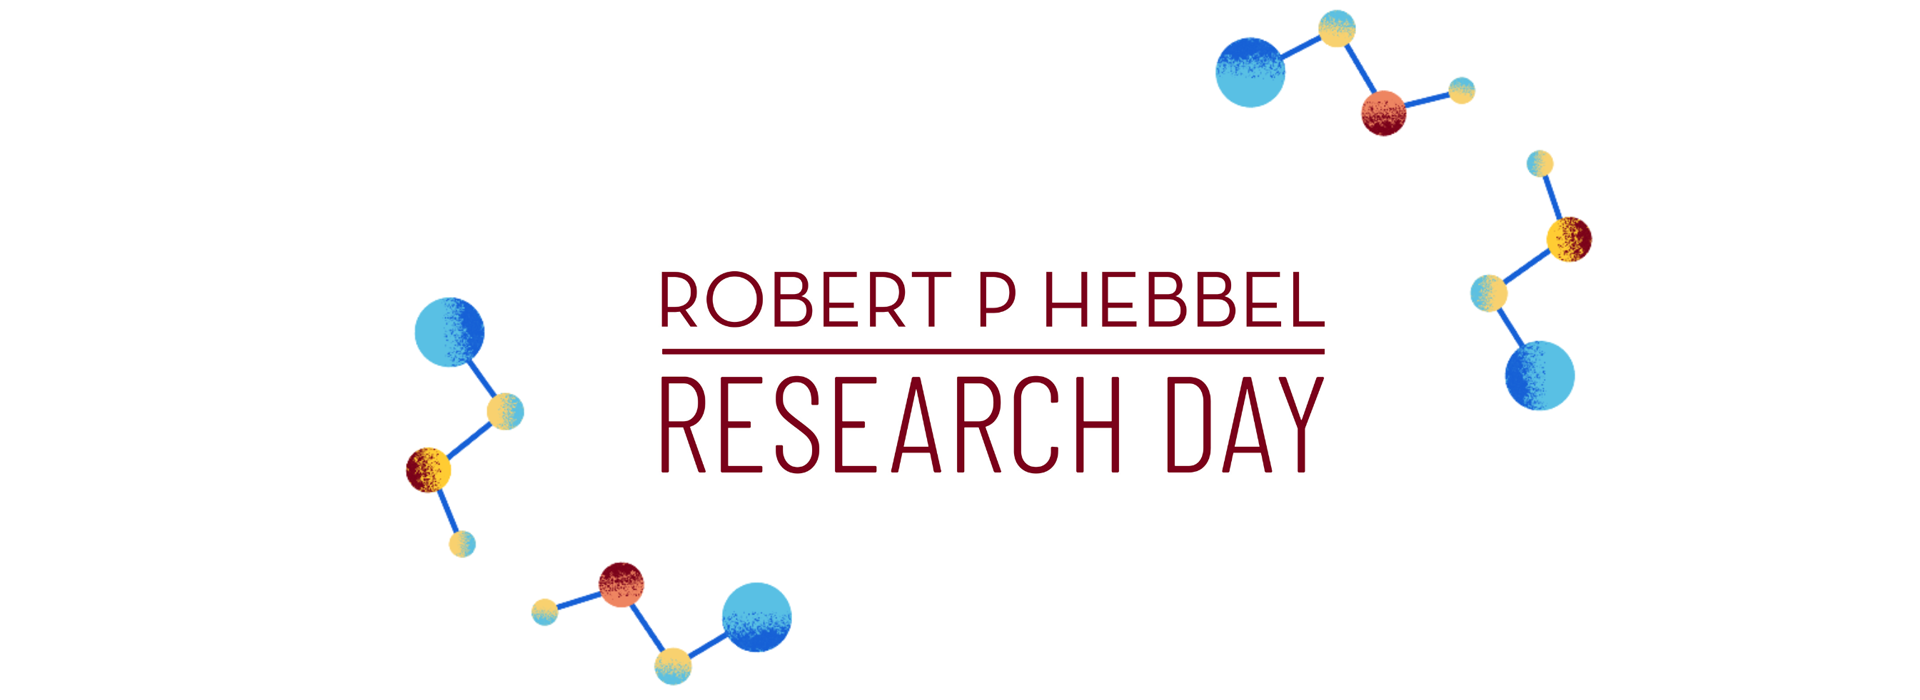 Decorative banner with text: Robert P Hebbel Research Day